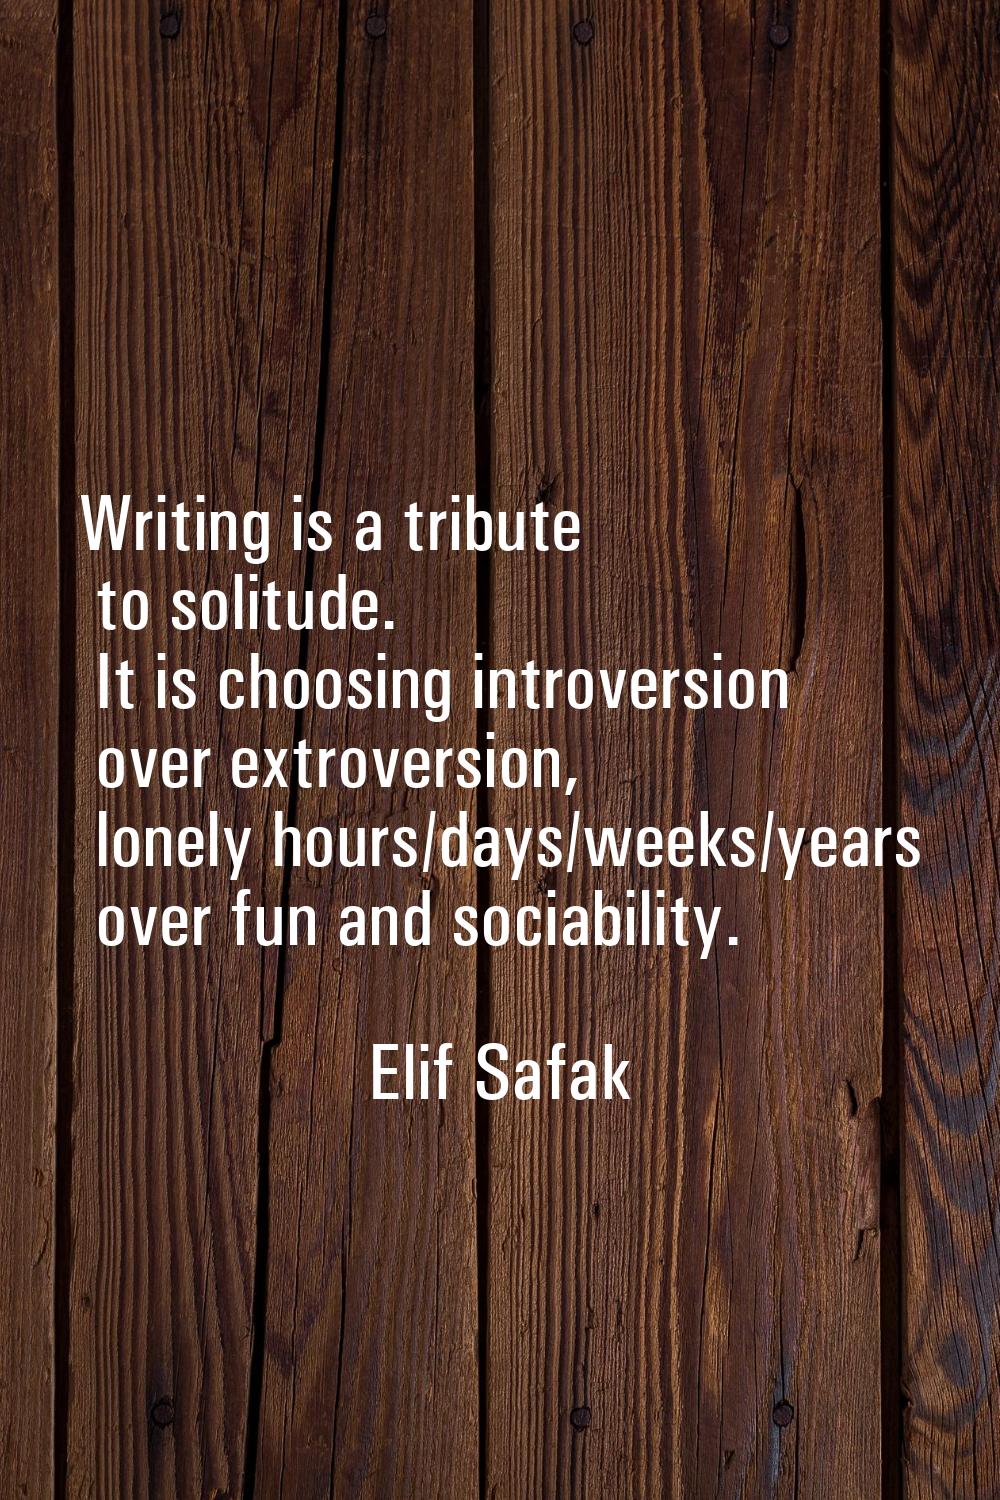 Writing is a tribute to solitude. It is choosing introversion over extroversion, lonely hours/days/